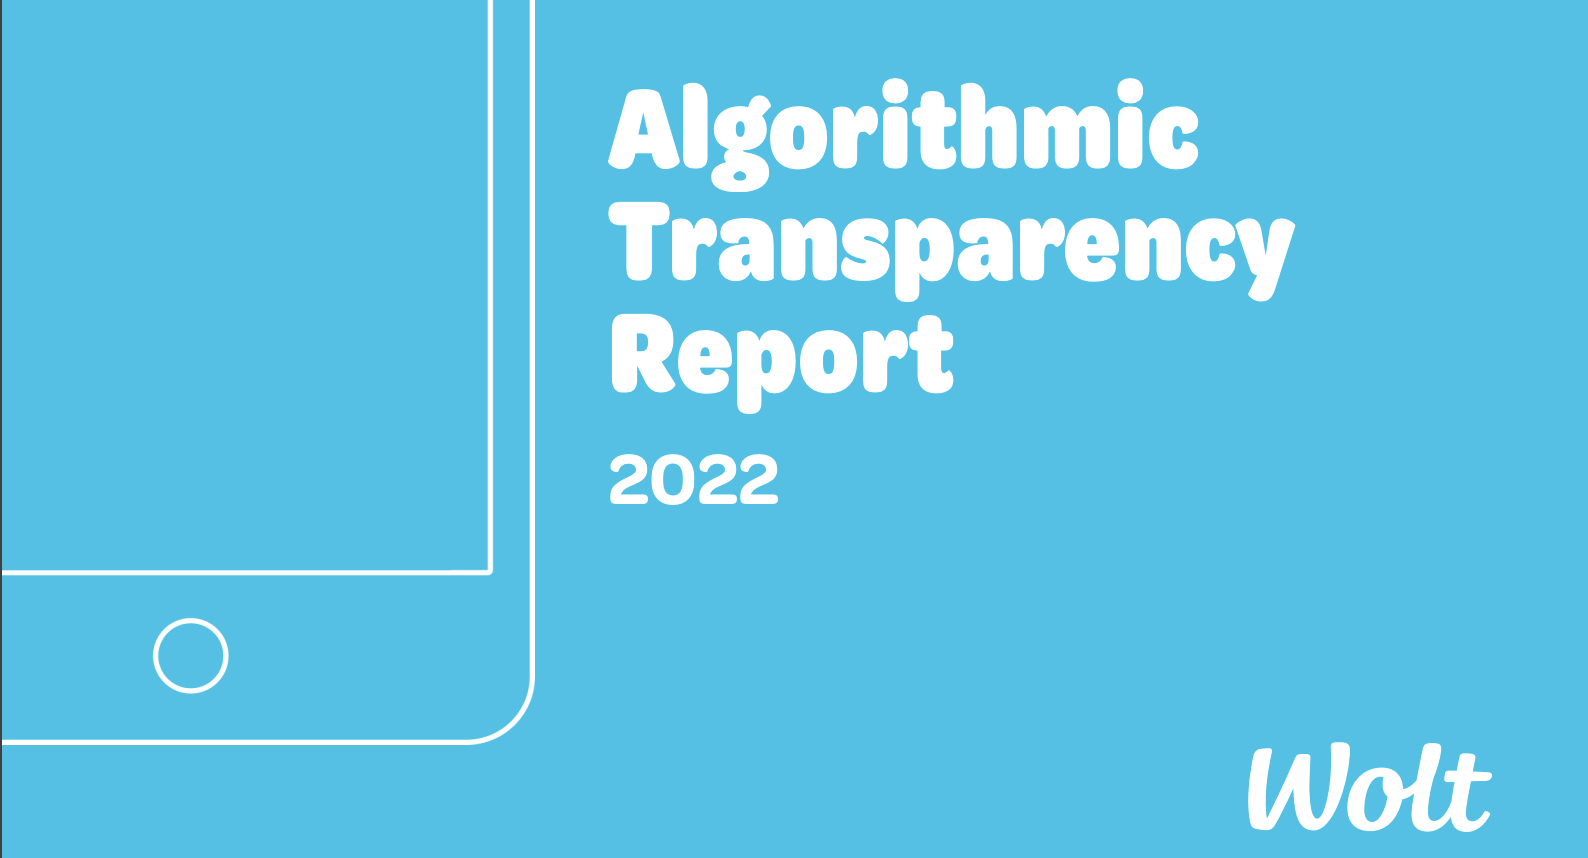 On the inadequacy of Wolt’s Algorithmic Transparency Report and the limits of “algorithmic management” discourse